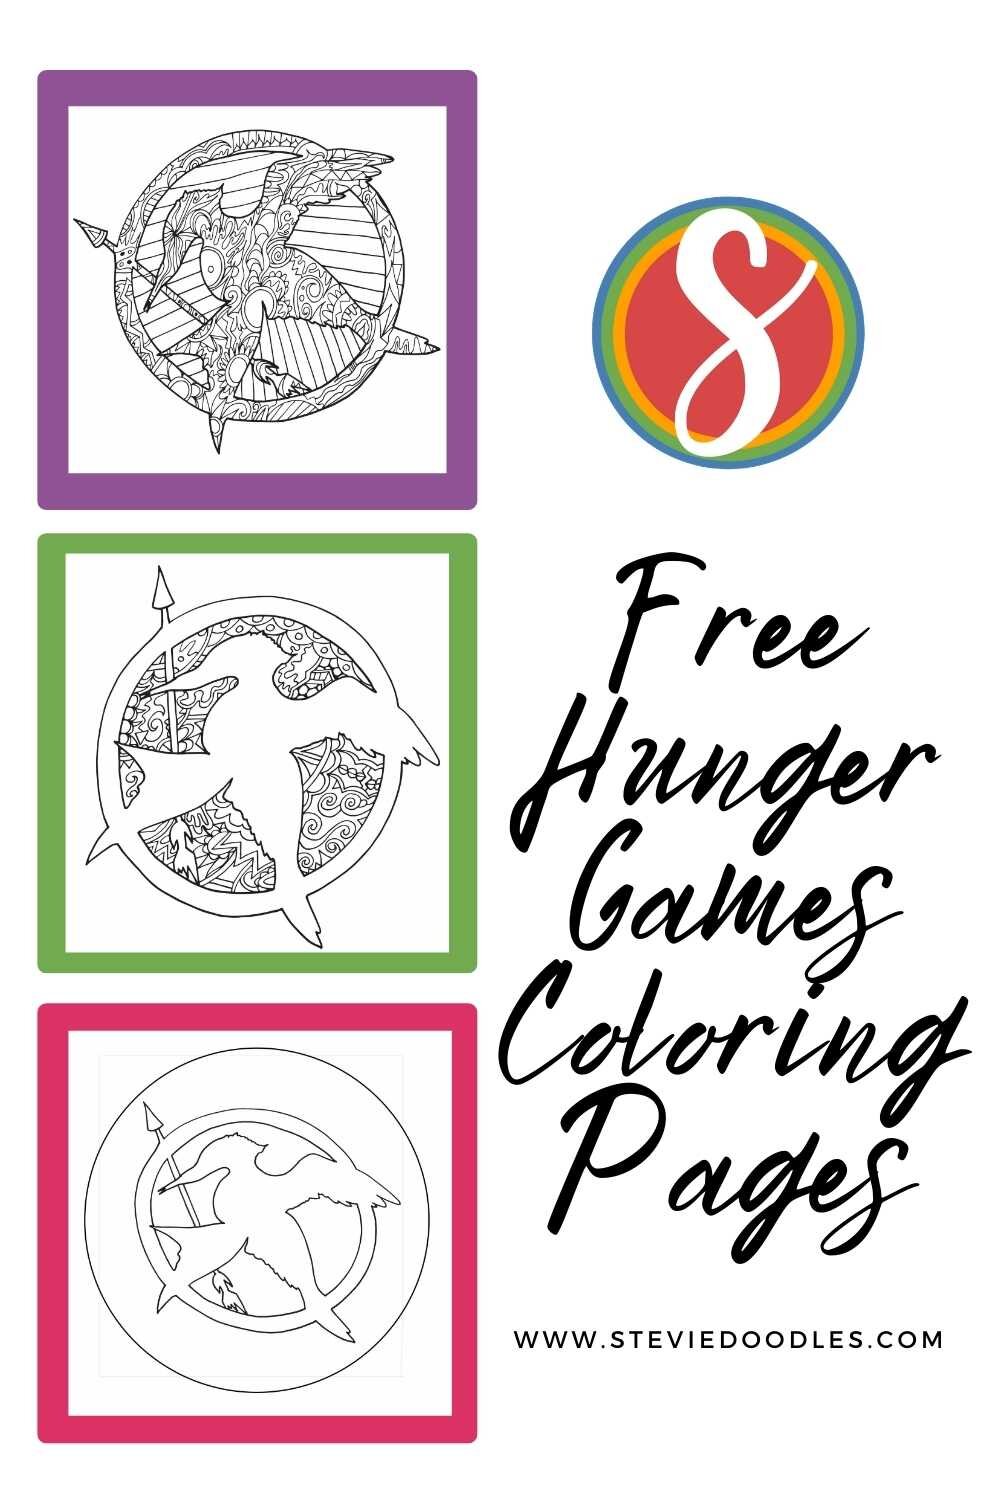 Free Hunger Games Coloring Pages - Print and color for your homeschool or classroom book discussions. Fan art from Stevie Doodles